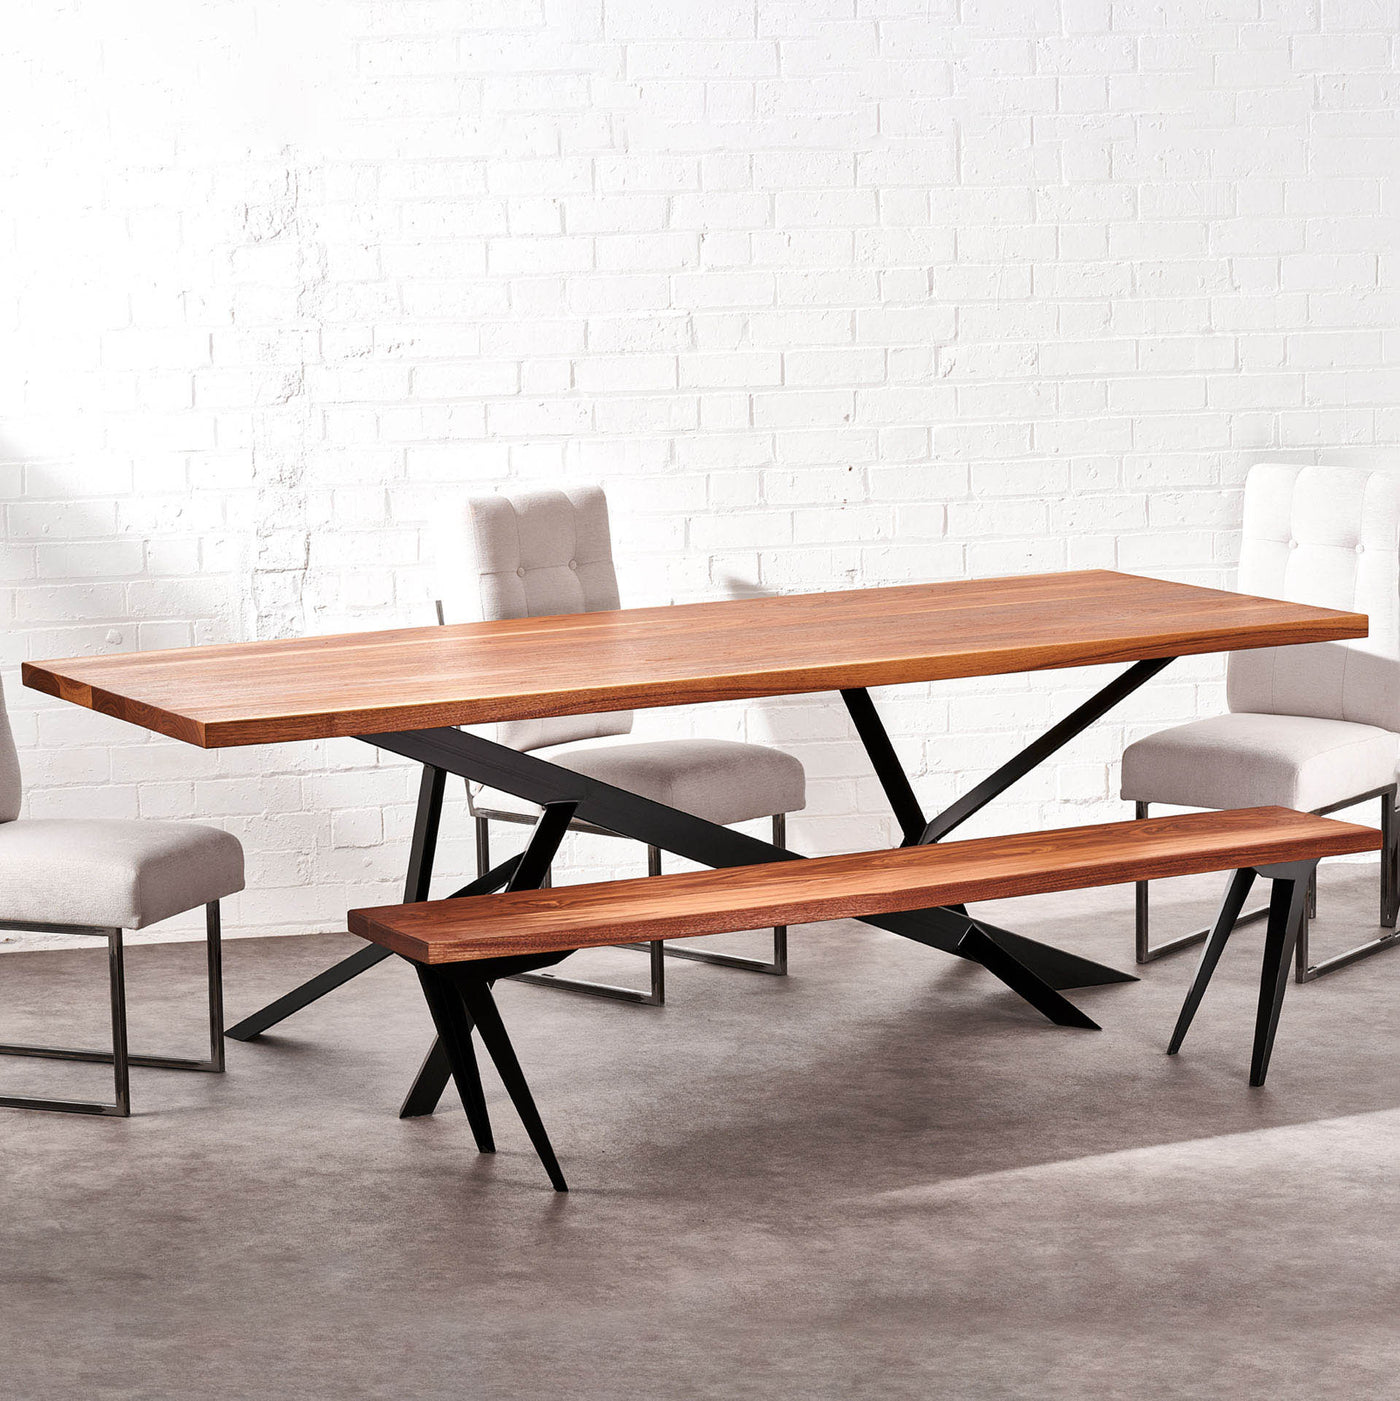 Fallen Tree Dining Table for 12 with Handcrafted Forged Steel Angled Legs